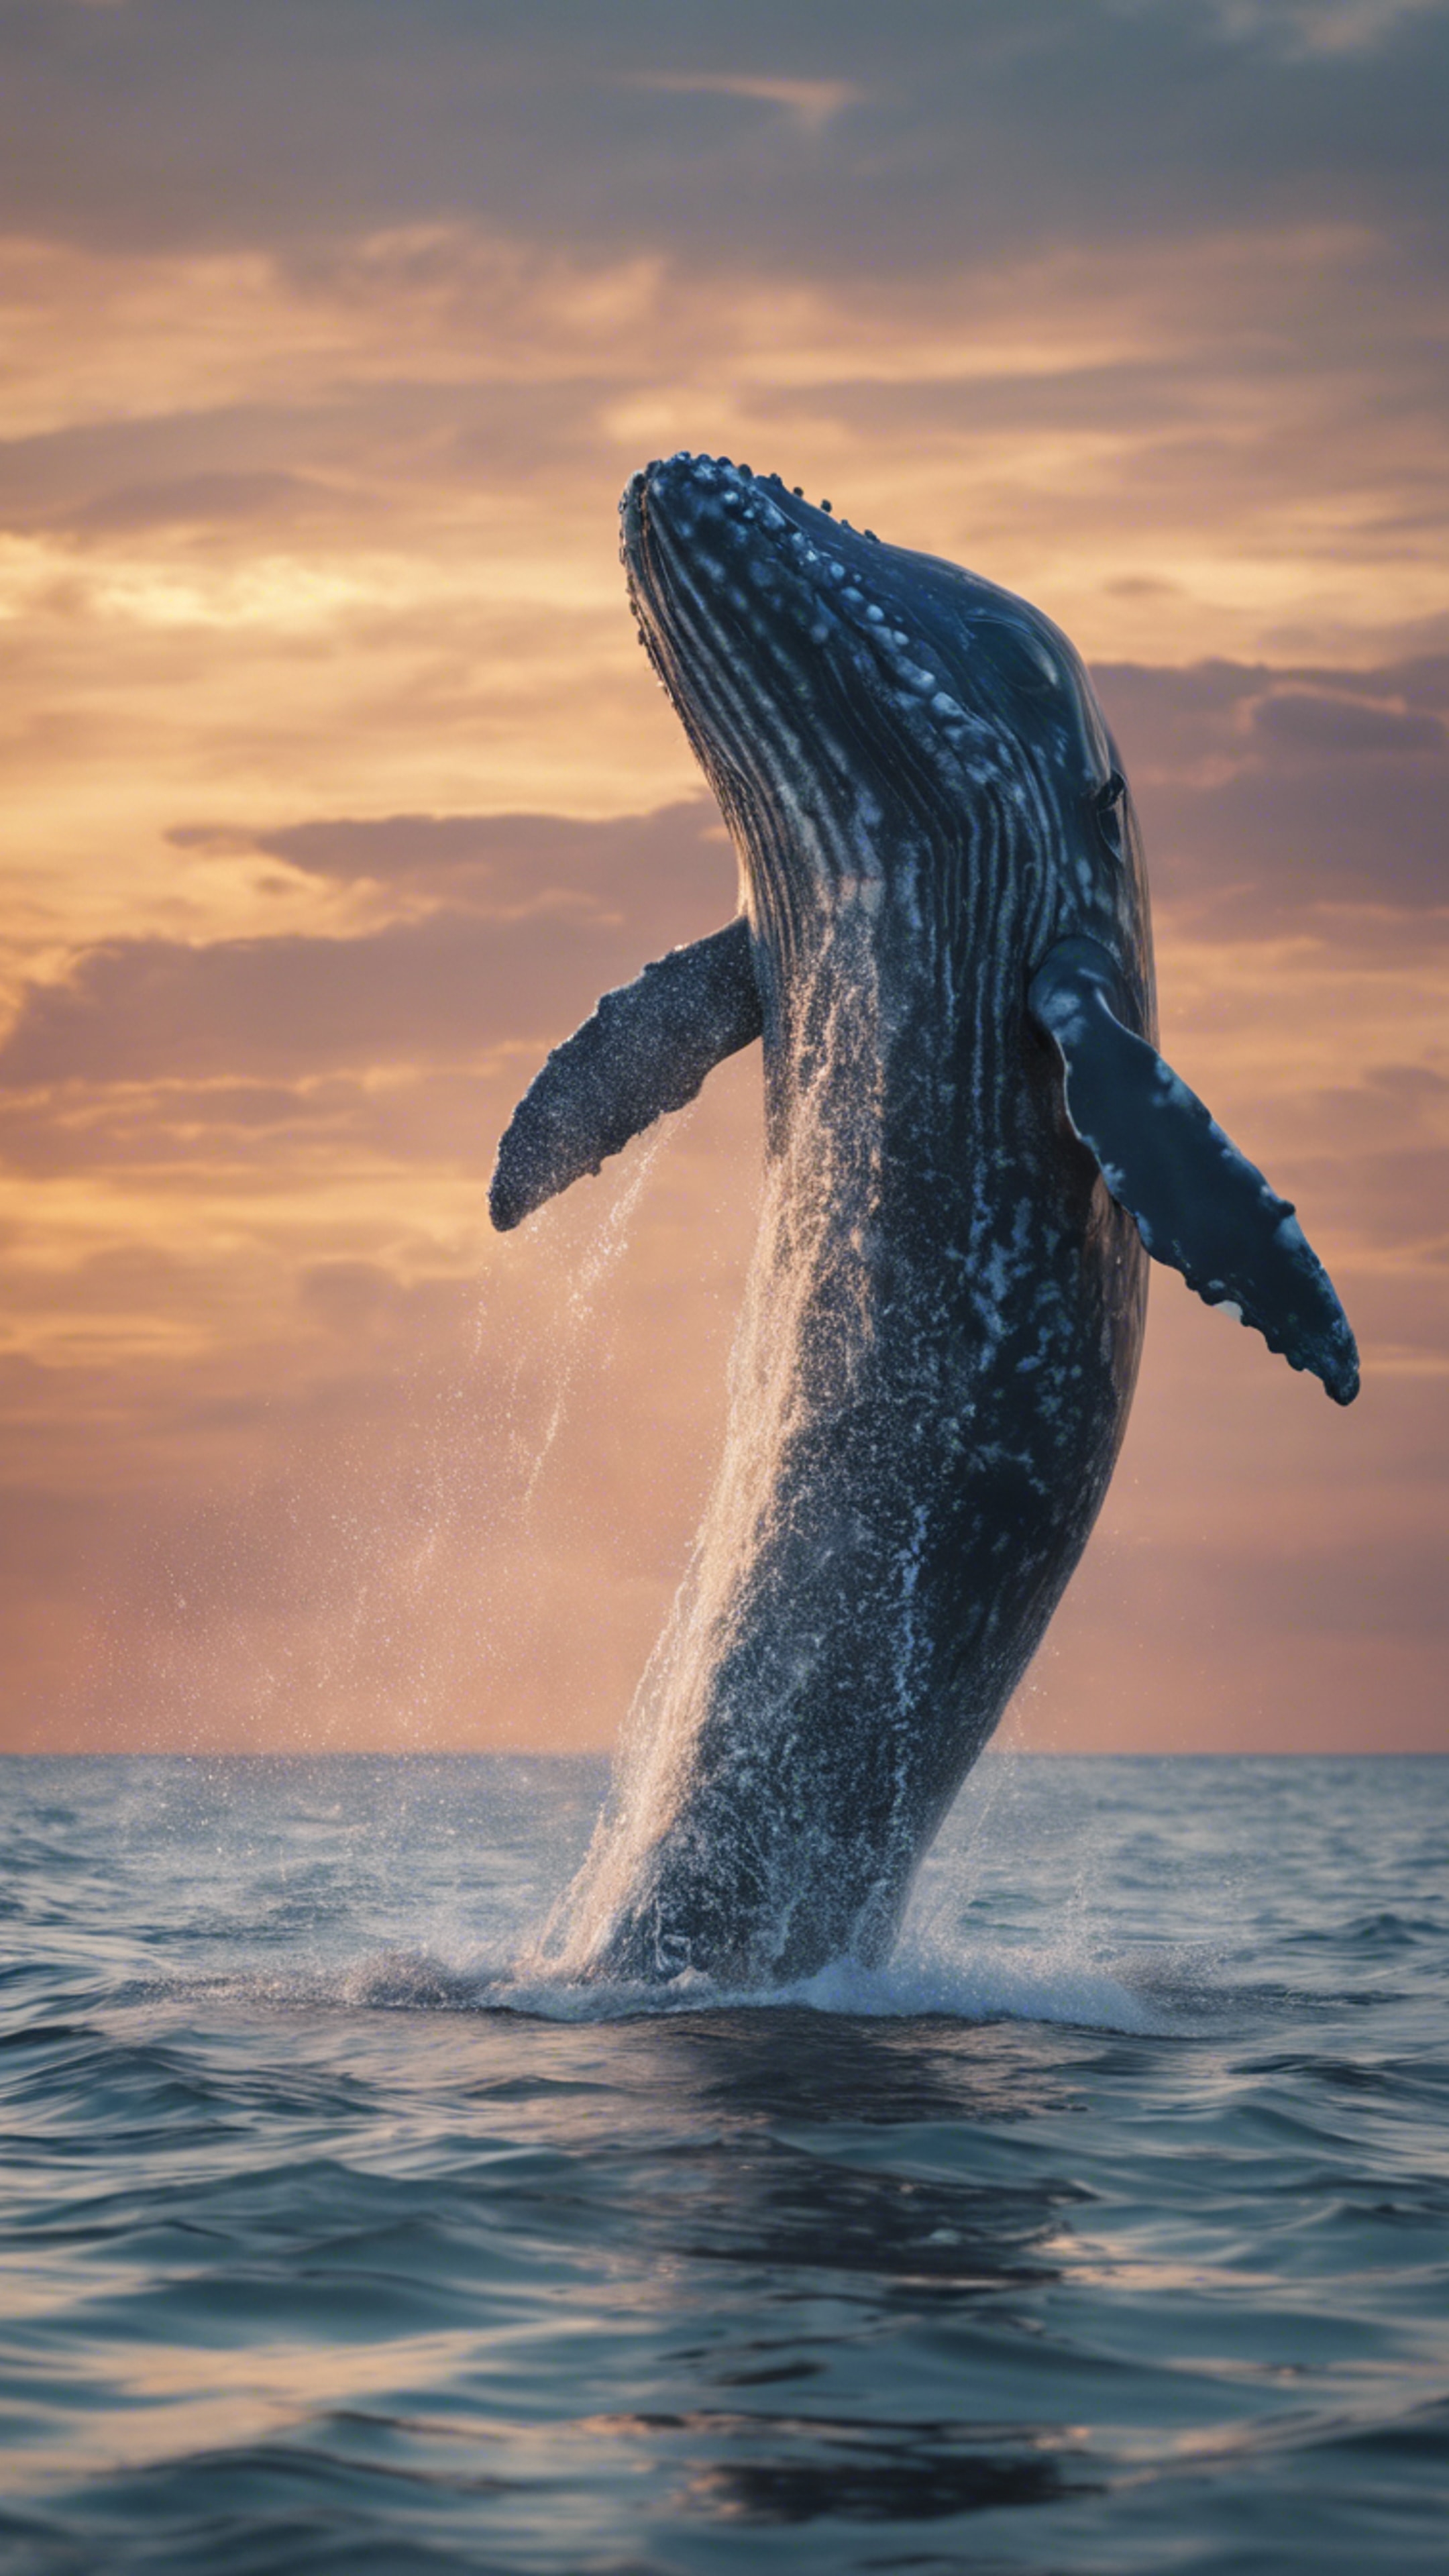 A chubby, baby grey whale playfully tail-slapping the sea surface at dusk. Wallpaper[e45e0b56325a4ca0b084]